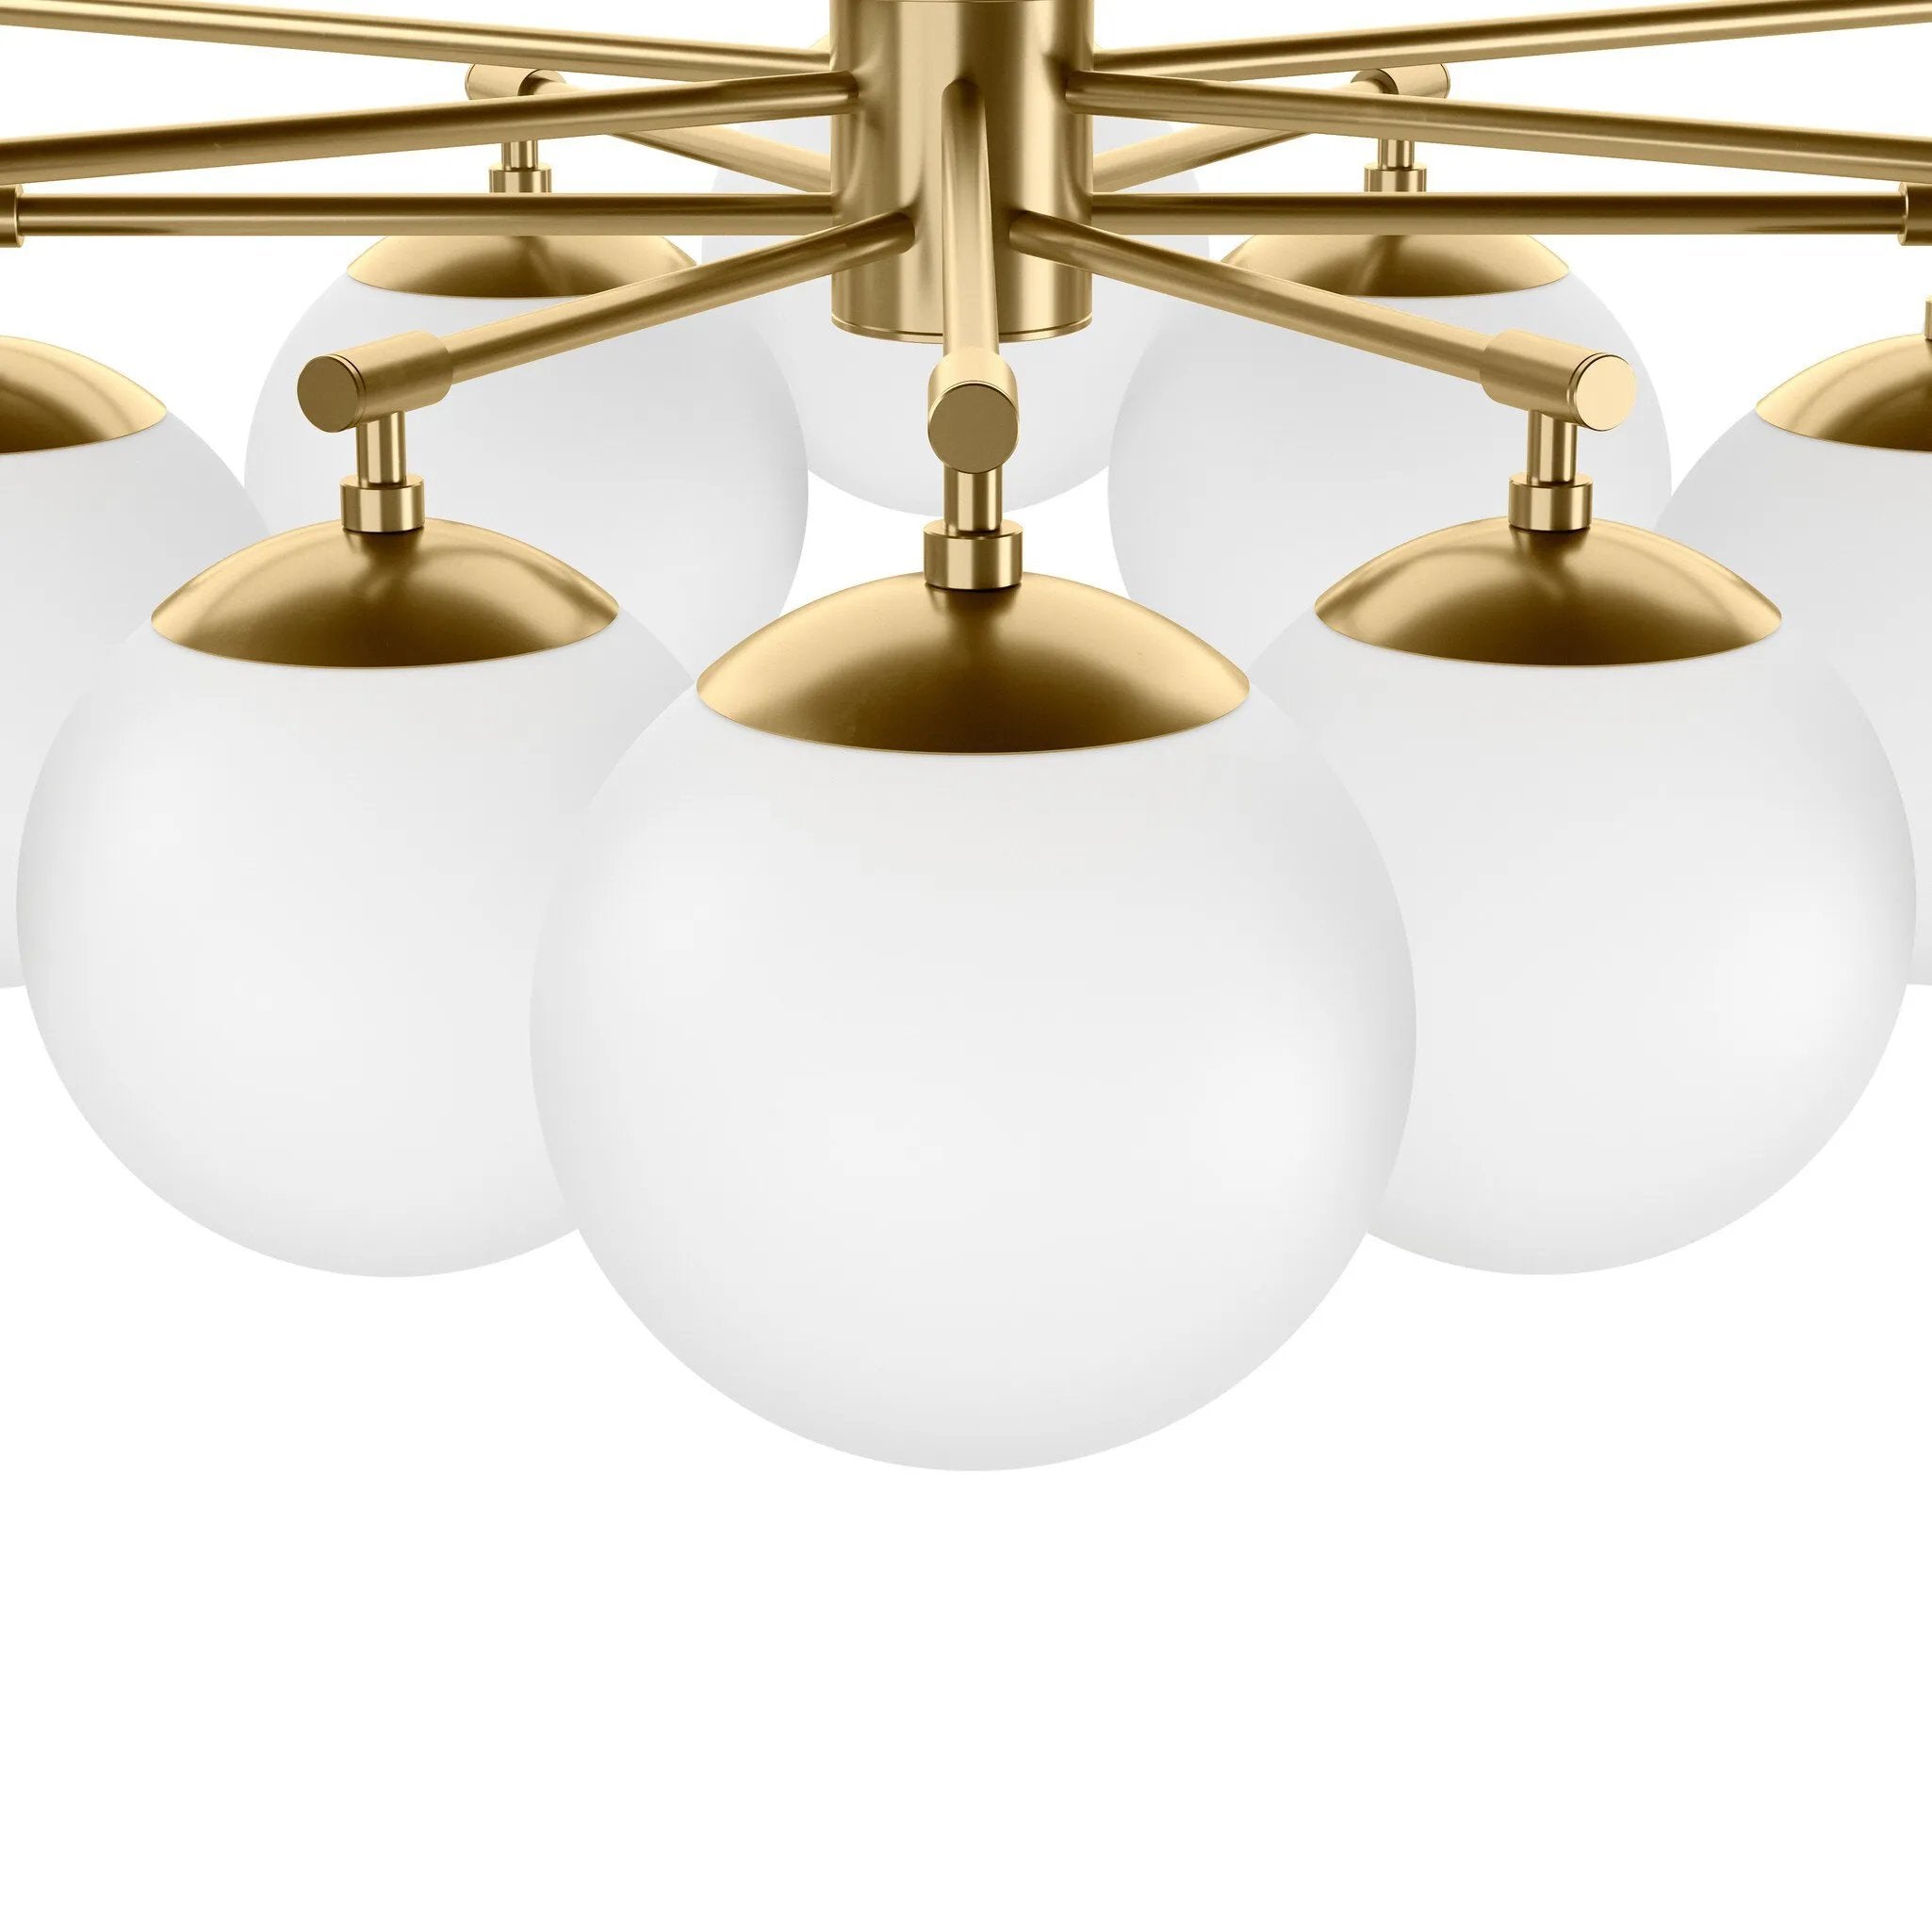 Matte glass spheres seem to extend and reach across smooth brass rods. Each globe is individually blown, shaped and sculpted by hand through a one-hour process. Matte globes are specially manufactured to evenly diffuse light. Brass and glass are 98% recyclable. Designed and sustainably crafted in Poland by Schwung.Overall Dimensions47.75"w x 47. Amethyst Home provides interior design, new home construction design consulting, vintage area rugs, and lighting in the Winter Garden metro area.